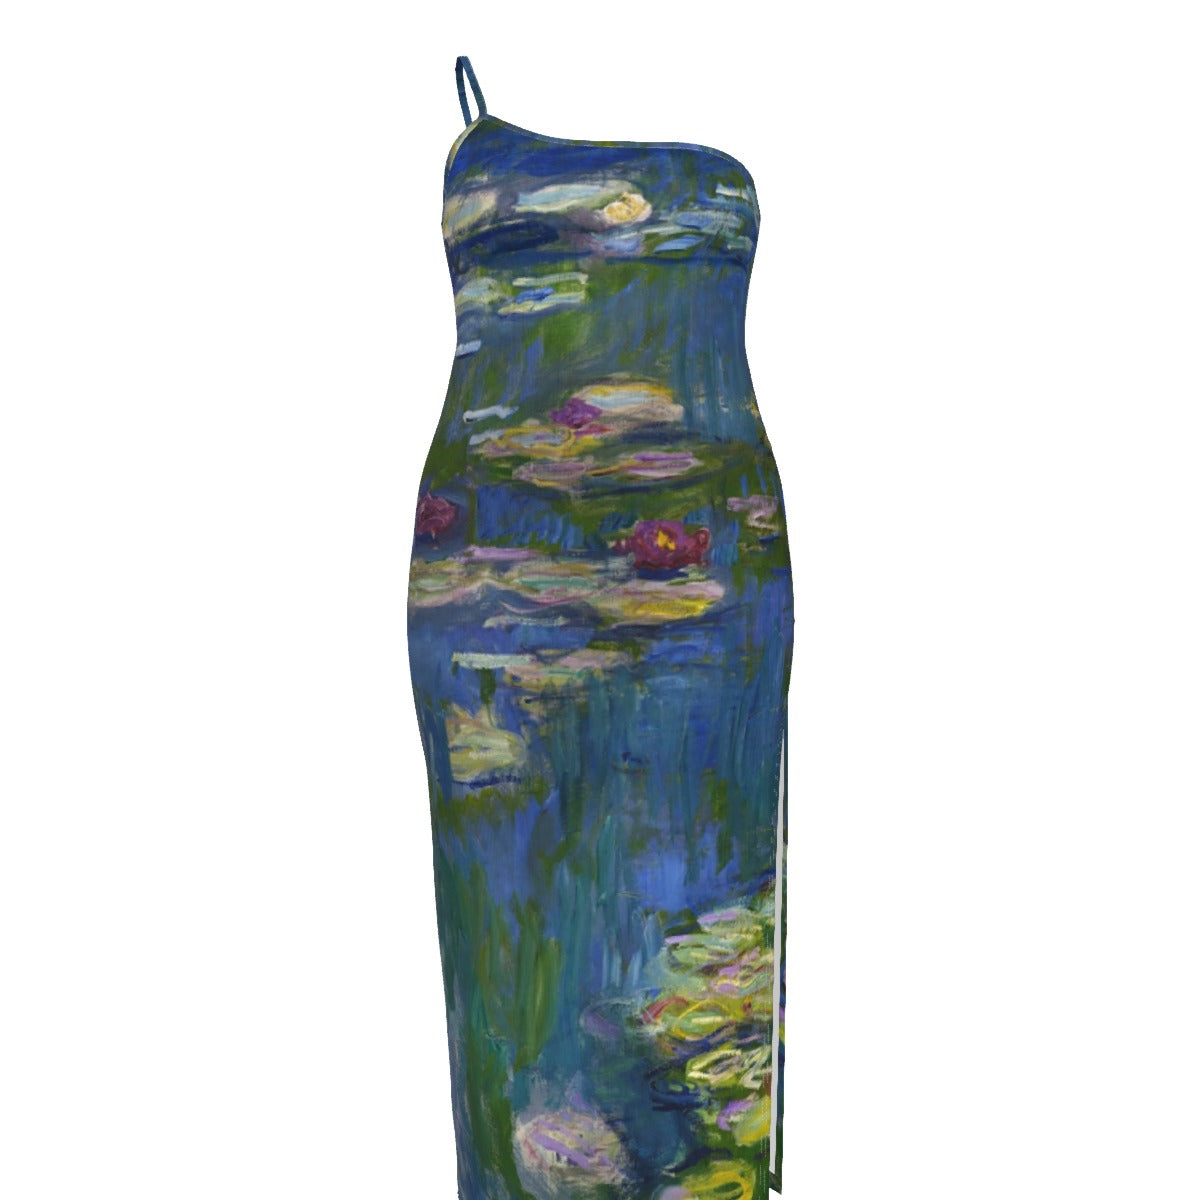 Inspired by Claude Monet's masterpiece "Water Lilies"